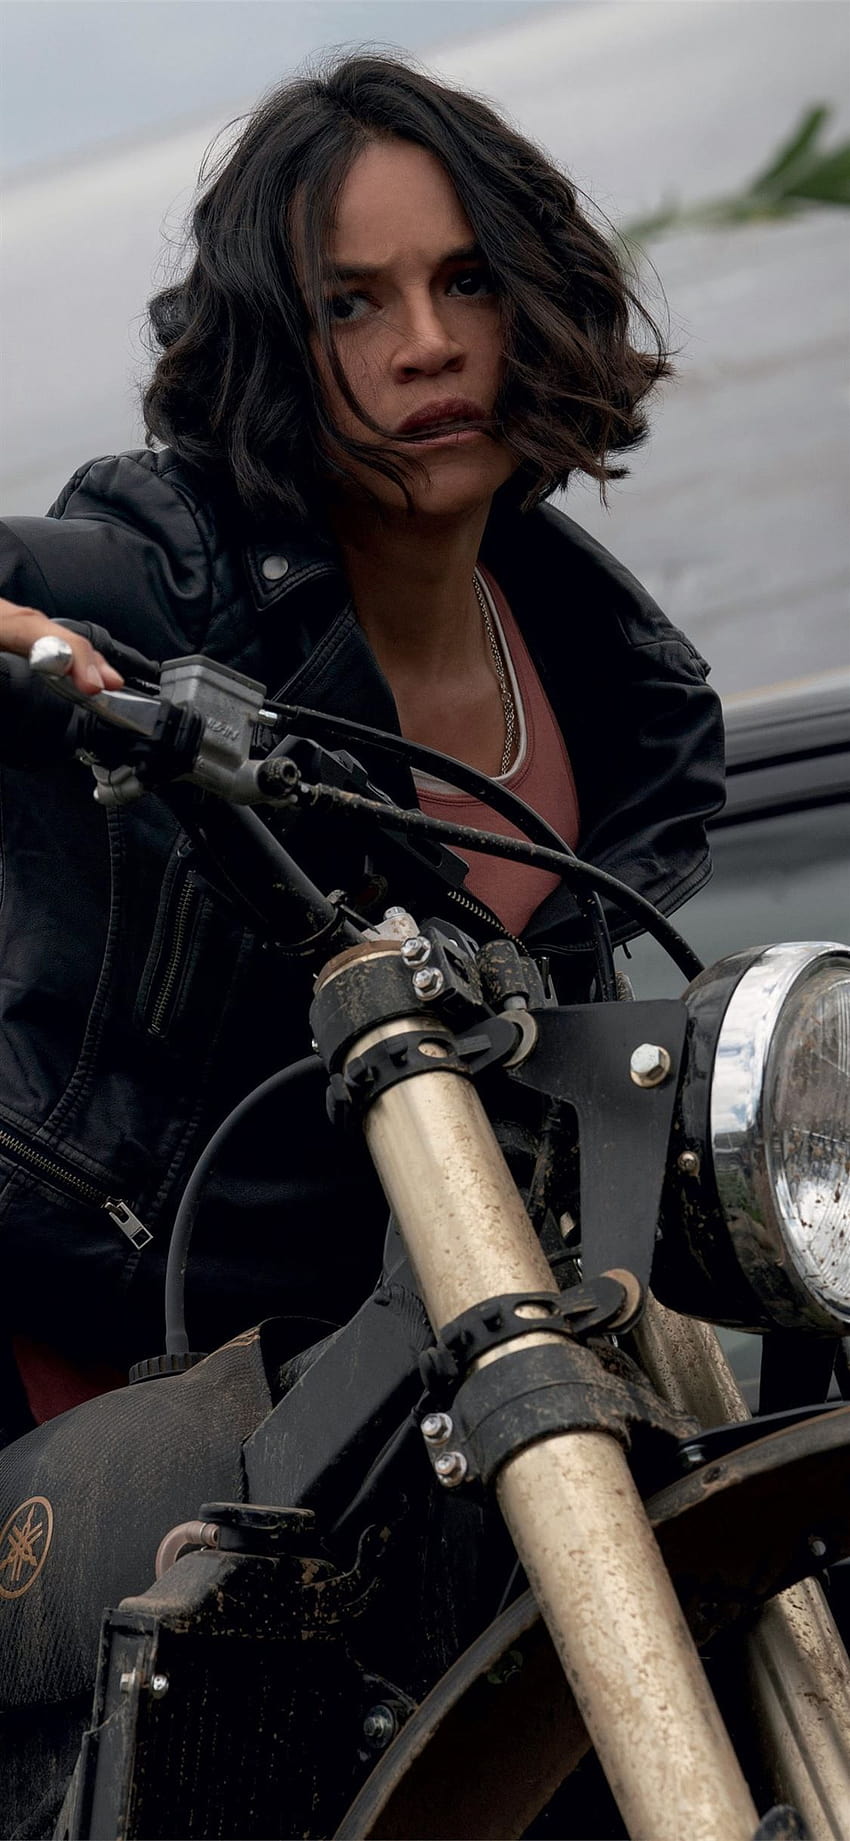 michelle rodriguez fast and furious 9 2020 film 5..., fast and furious letty HD-Handy-Hintergrundbild